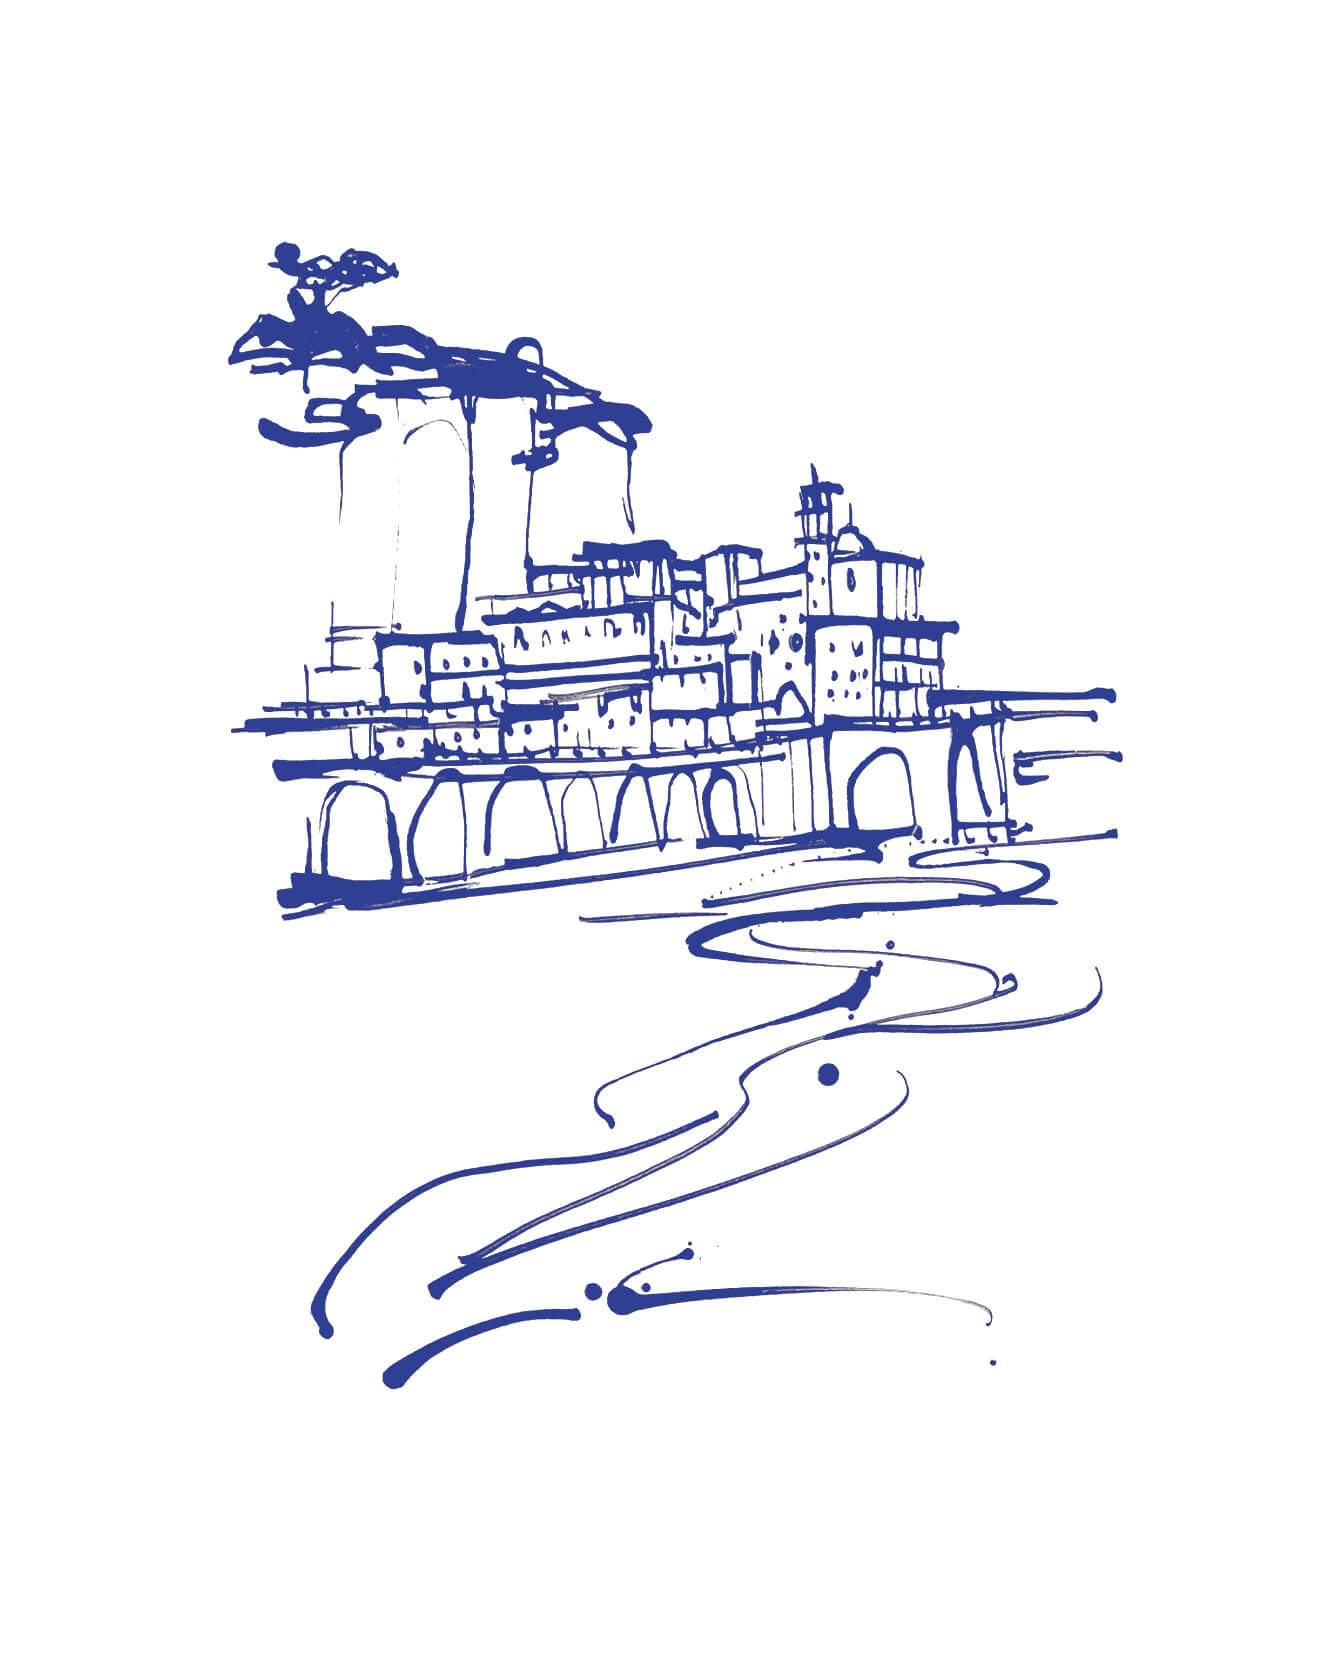 In celebration of the famous Amalfi Coast the Italian fashion house Kiton commissioned an illustration for a collection launching next year  - a drawing of the Naples coastline